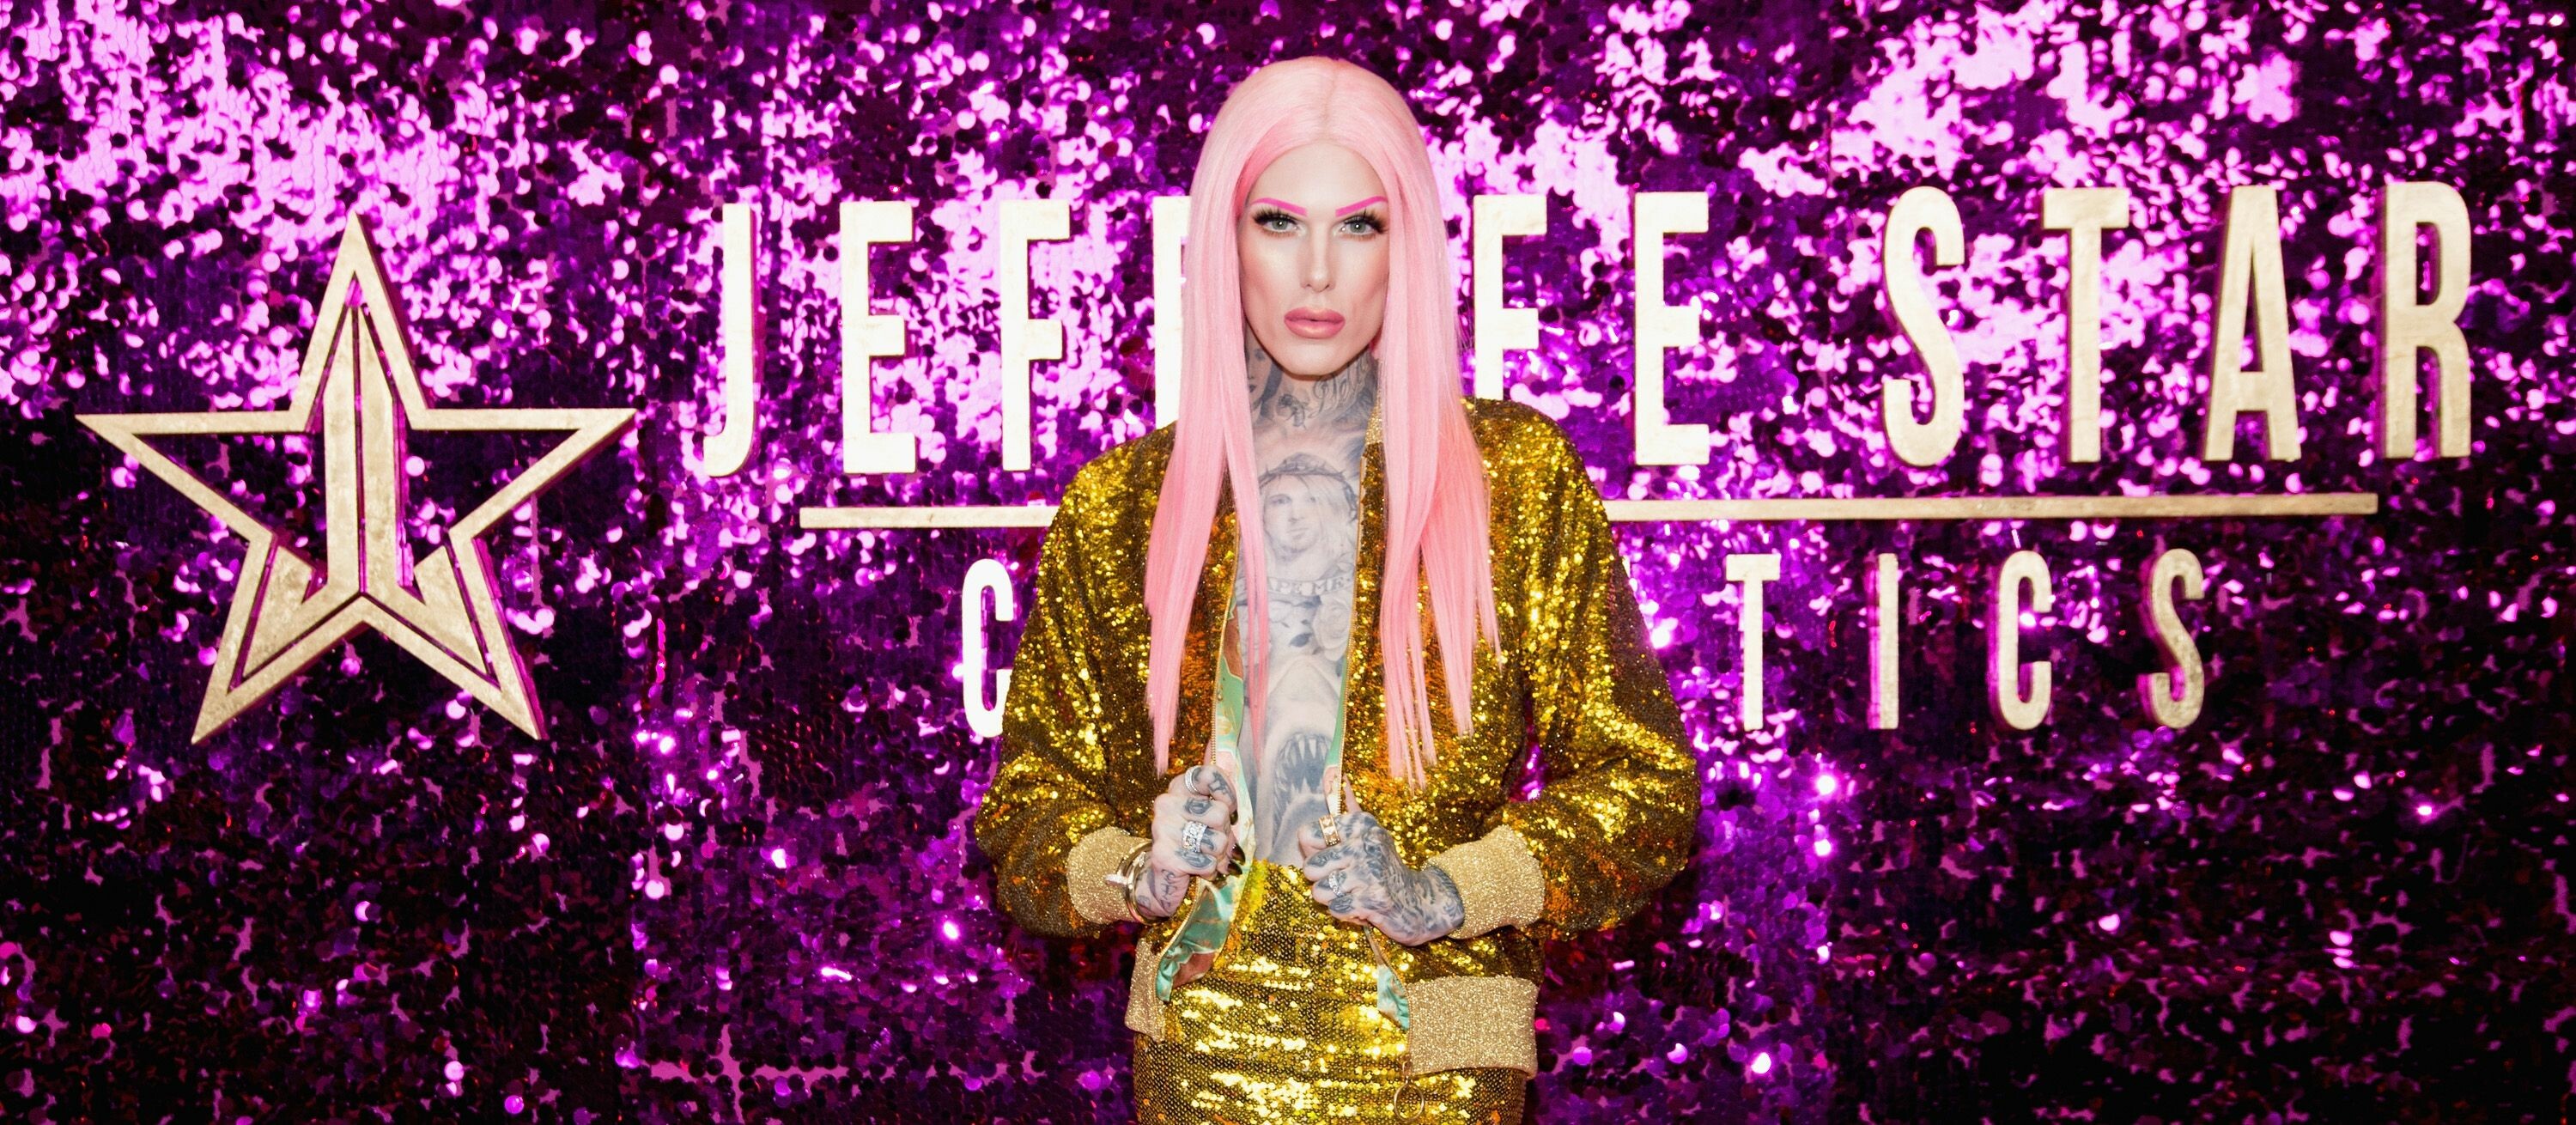 Jeffree Star: "Blush" was released for digital download on February 16, 2010. 3000x1310 Dual Screen Wallpaper.